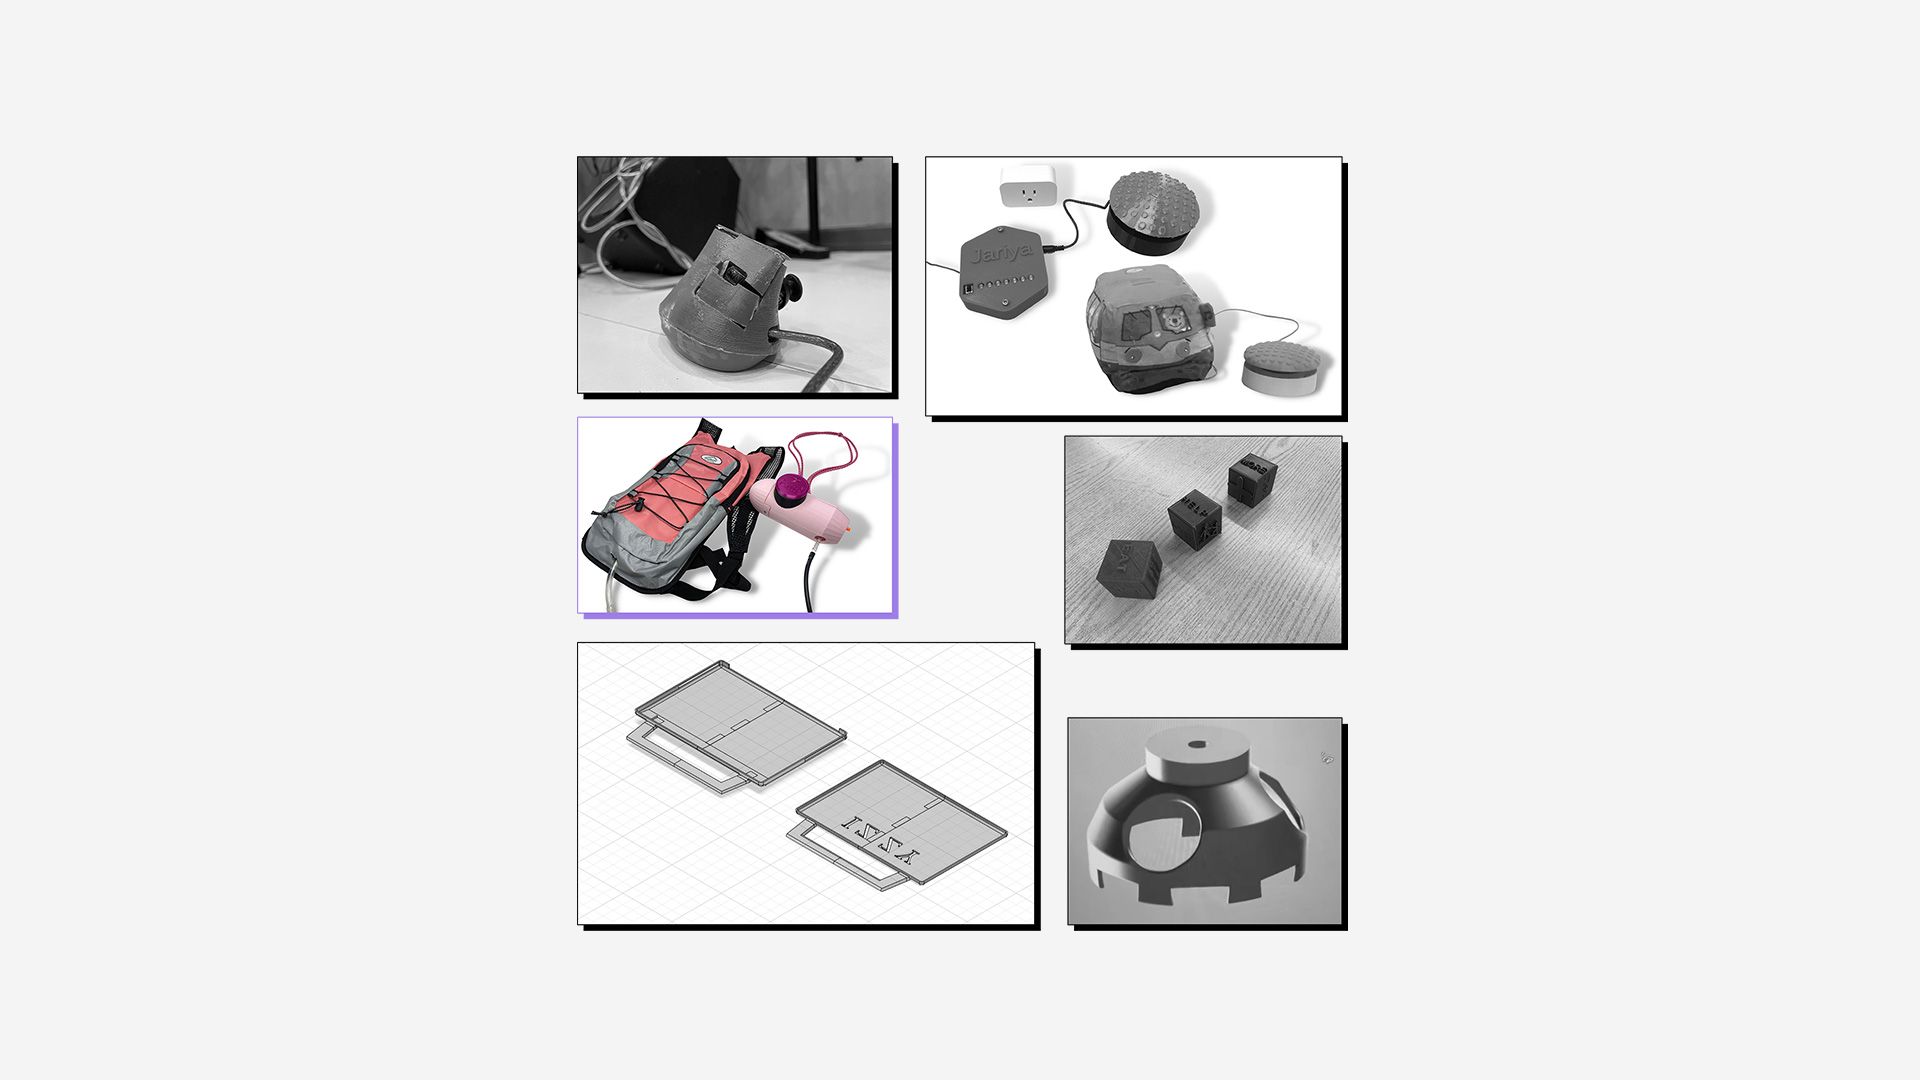 Collage of 3D printed assistive devices with winning entry (adaptive water gun) highlighted.